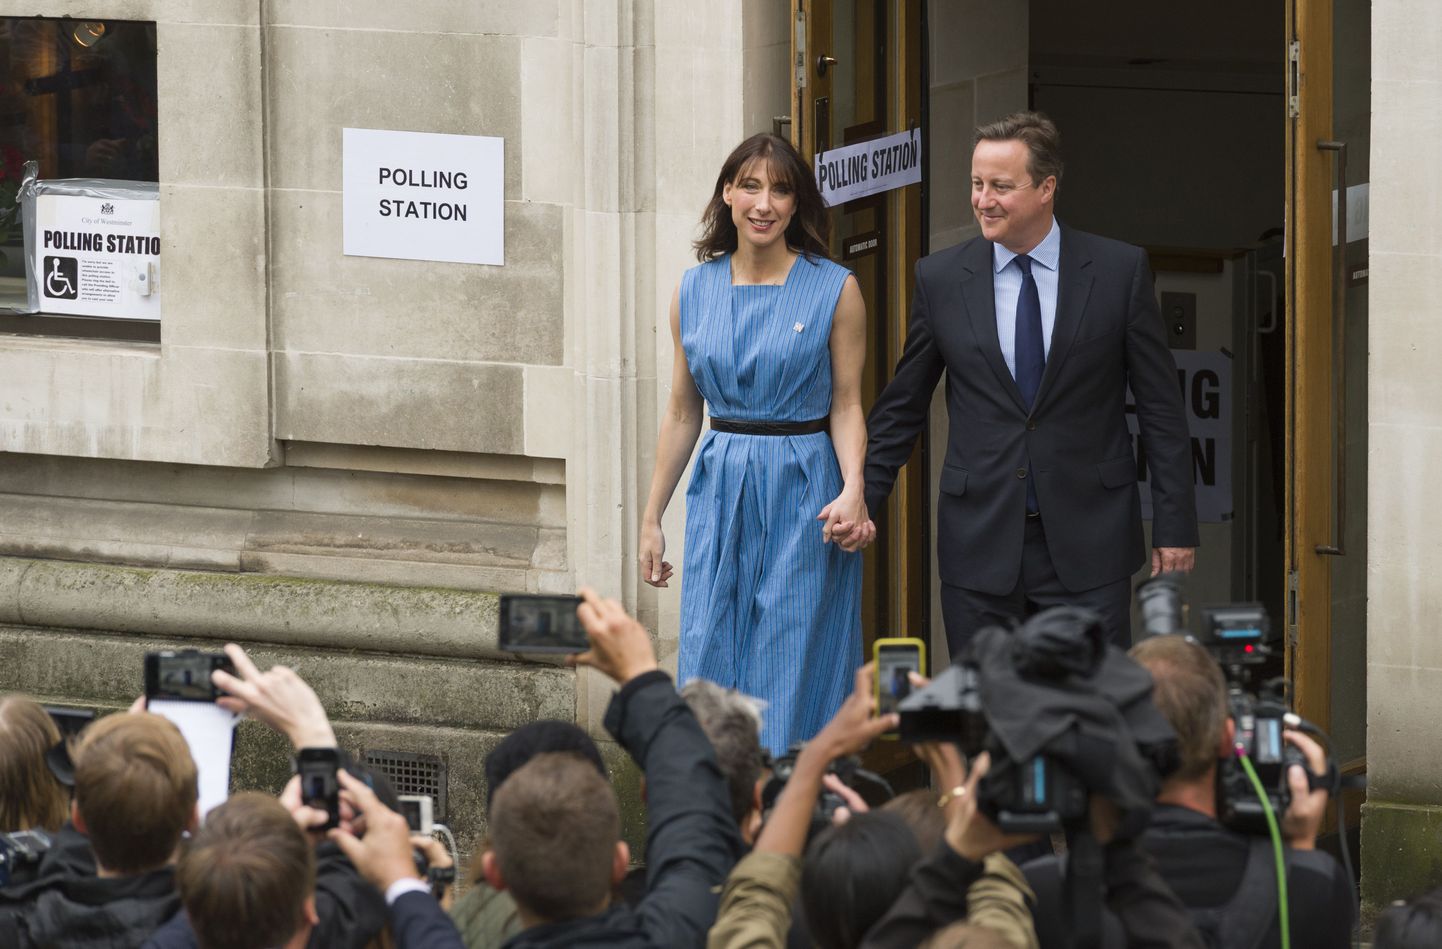 2879325 06/23/2016 British Prime Minister David Cameron and his wife, Samantha, at the Methodist Central Hall, Westminster after voting in the referendum on Britain's European Union membership. Alex McNaughton/Sputnik